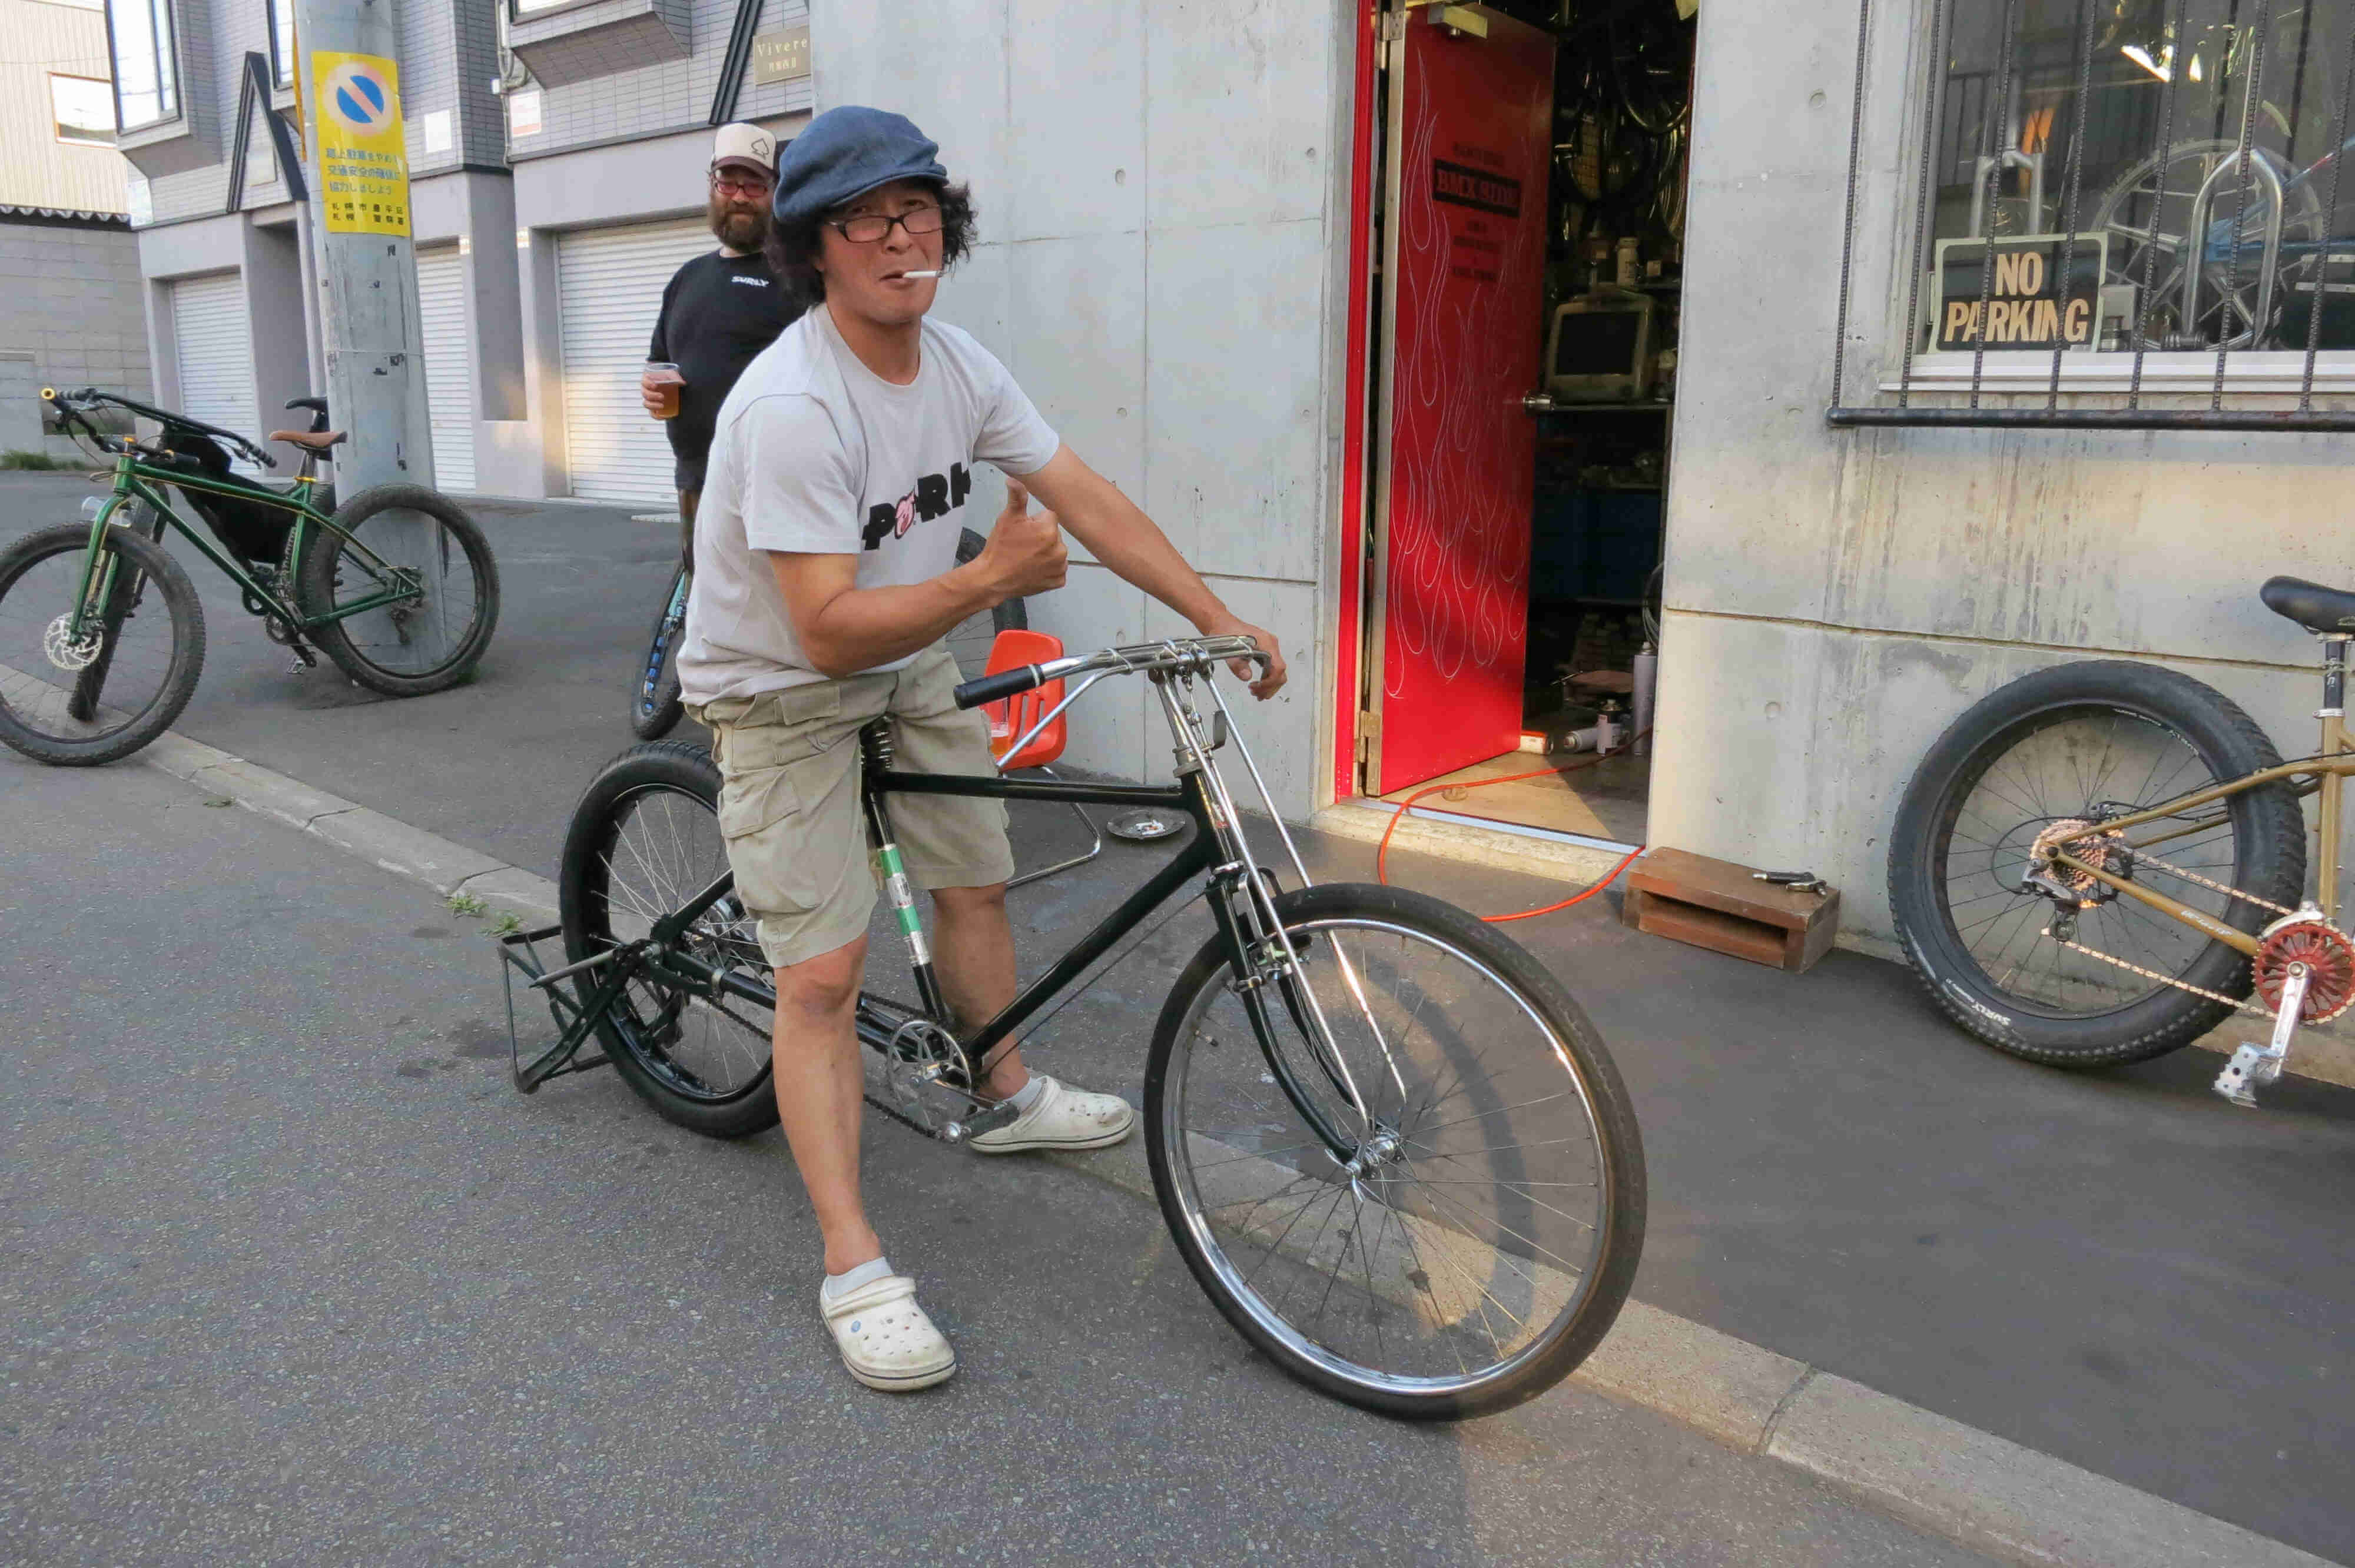 Right side view of a cyclist, sitting on a bike with a cigarette in their mouth, on a sidewalk in front of a bike shop